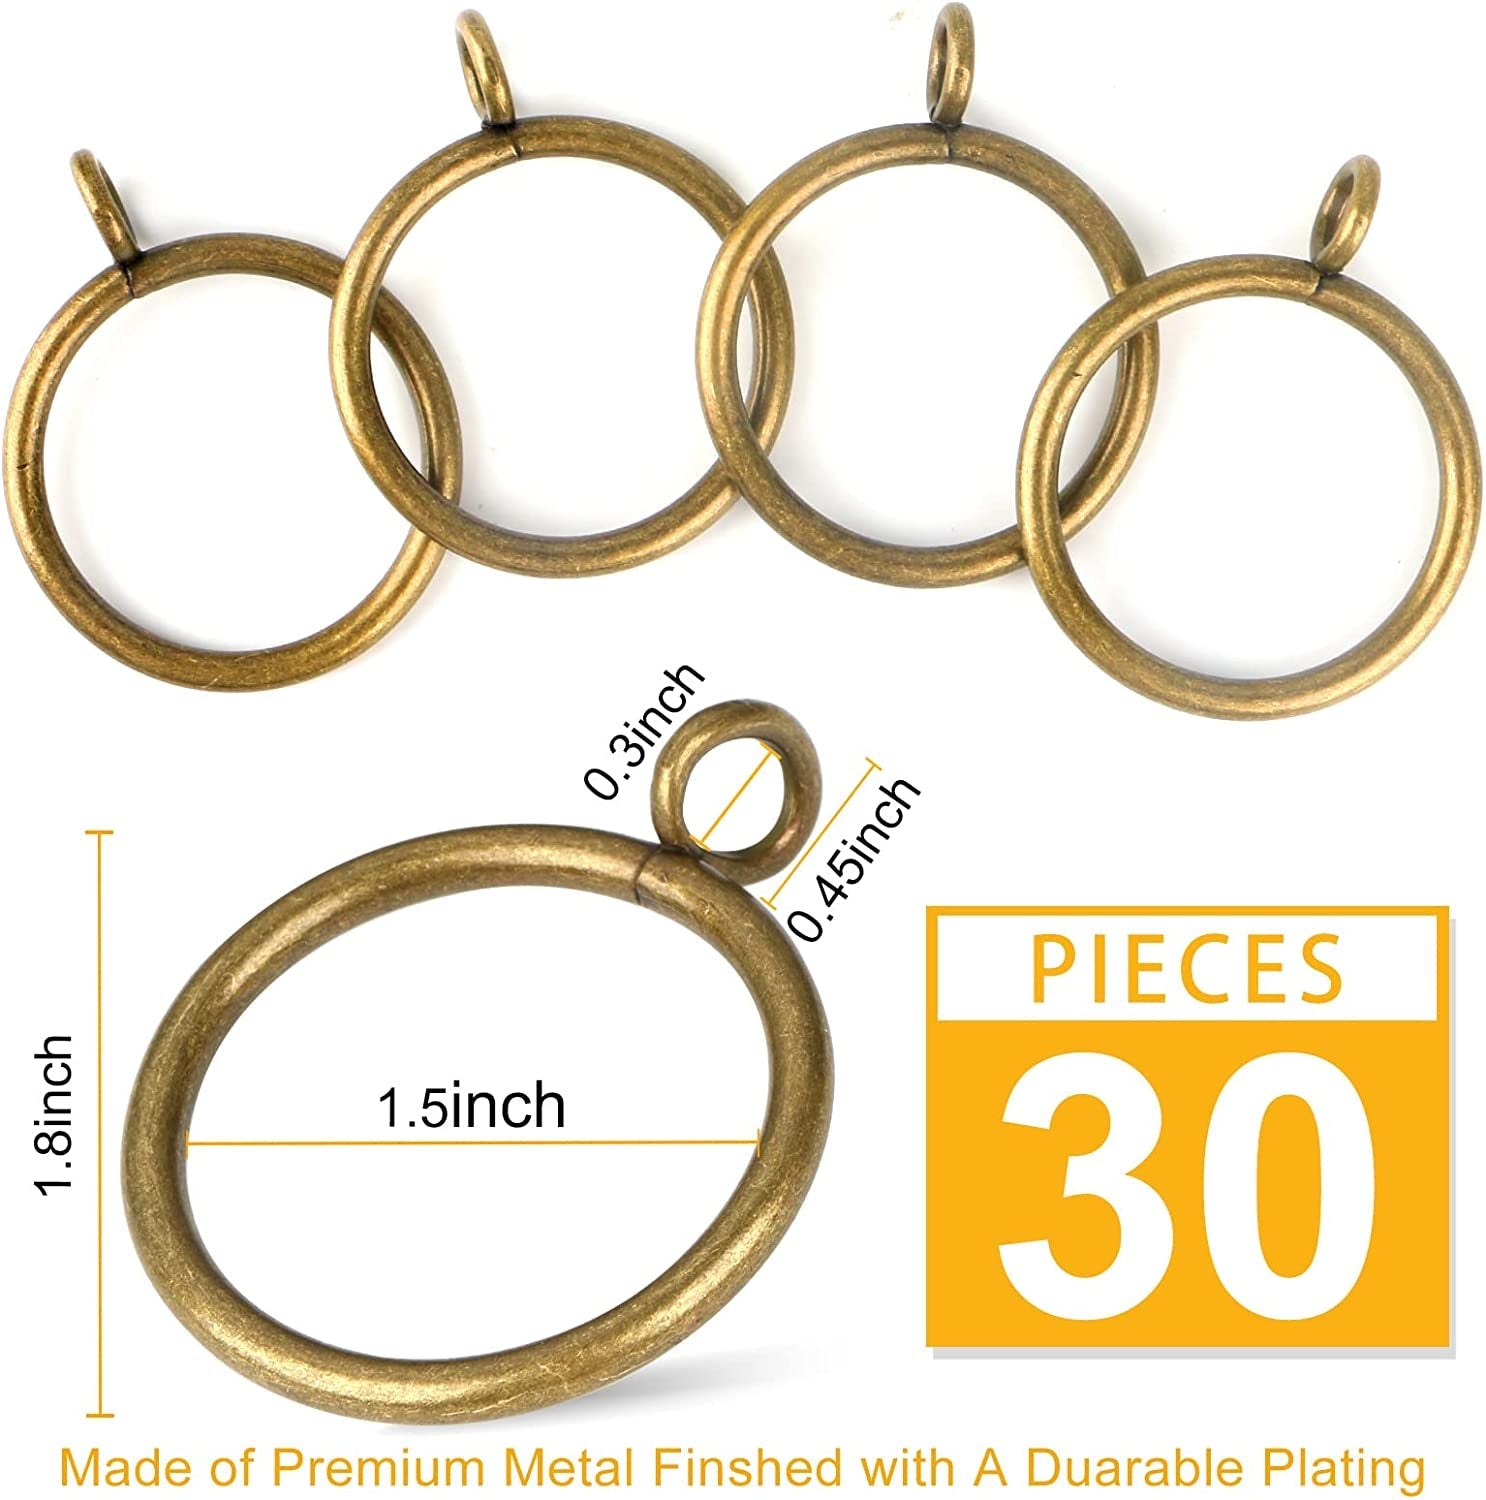 1 1/2-Inch Antique Brass Curtain Rings with Eyelets for Curtain Rods (Set of 30 PCS Curtain Rings)